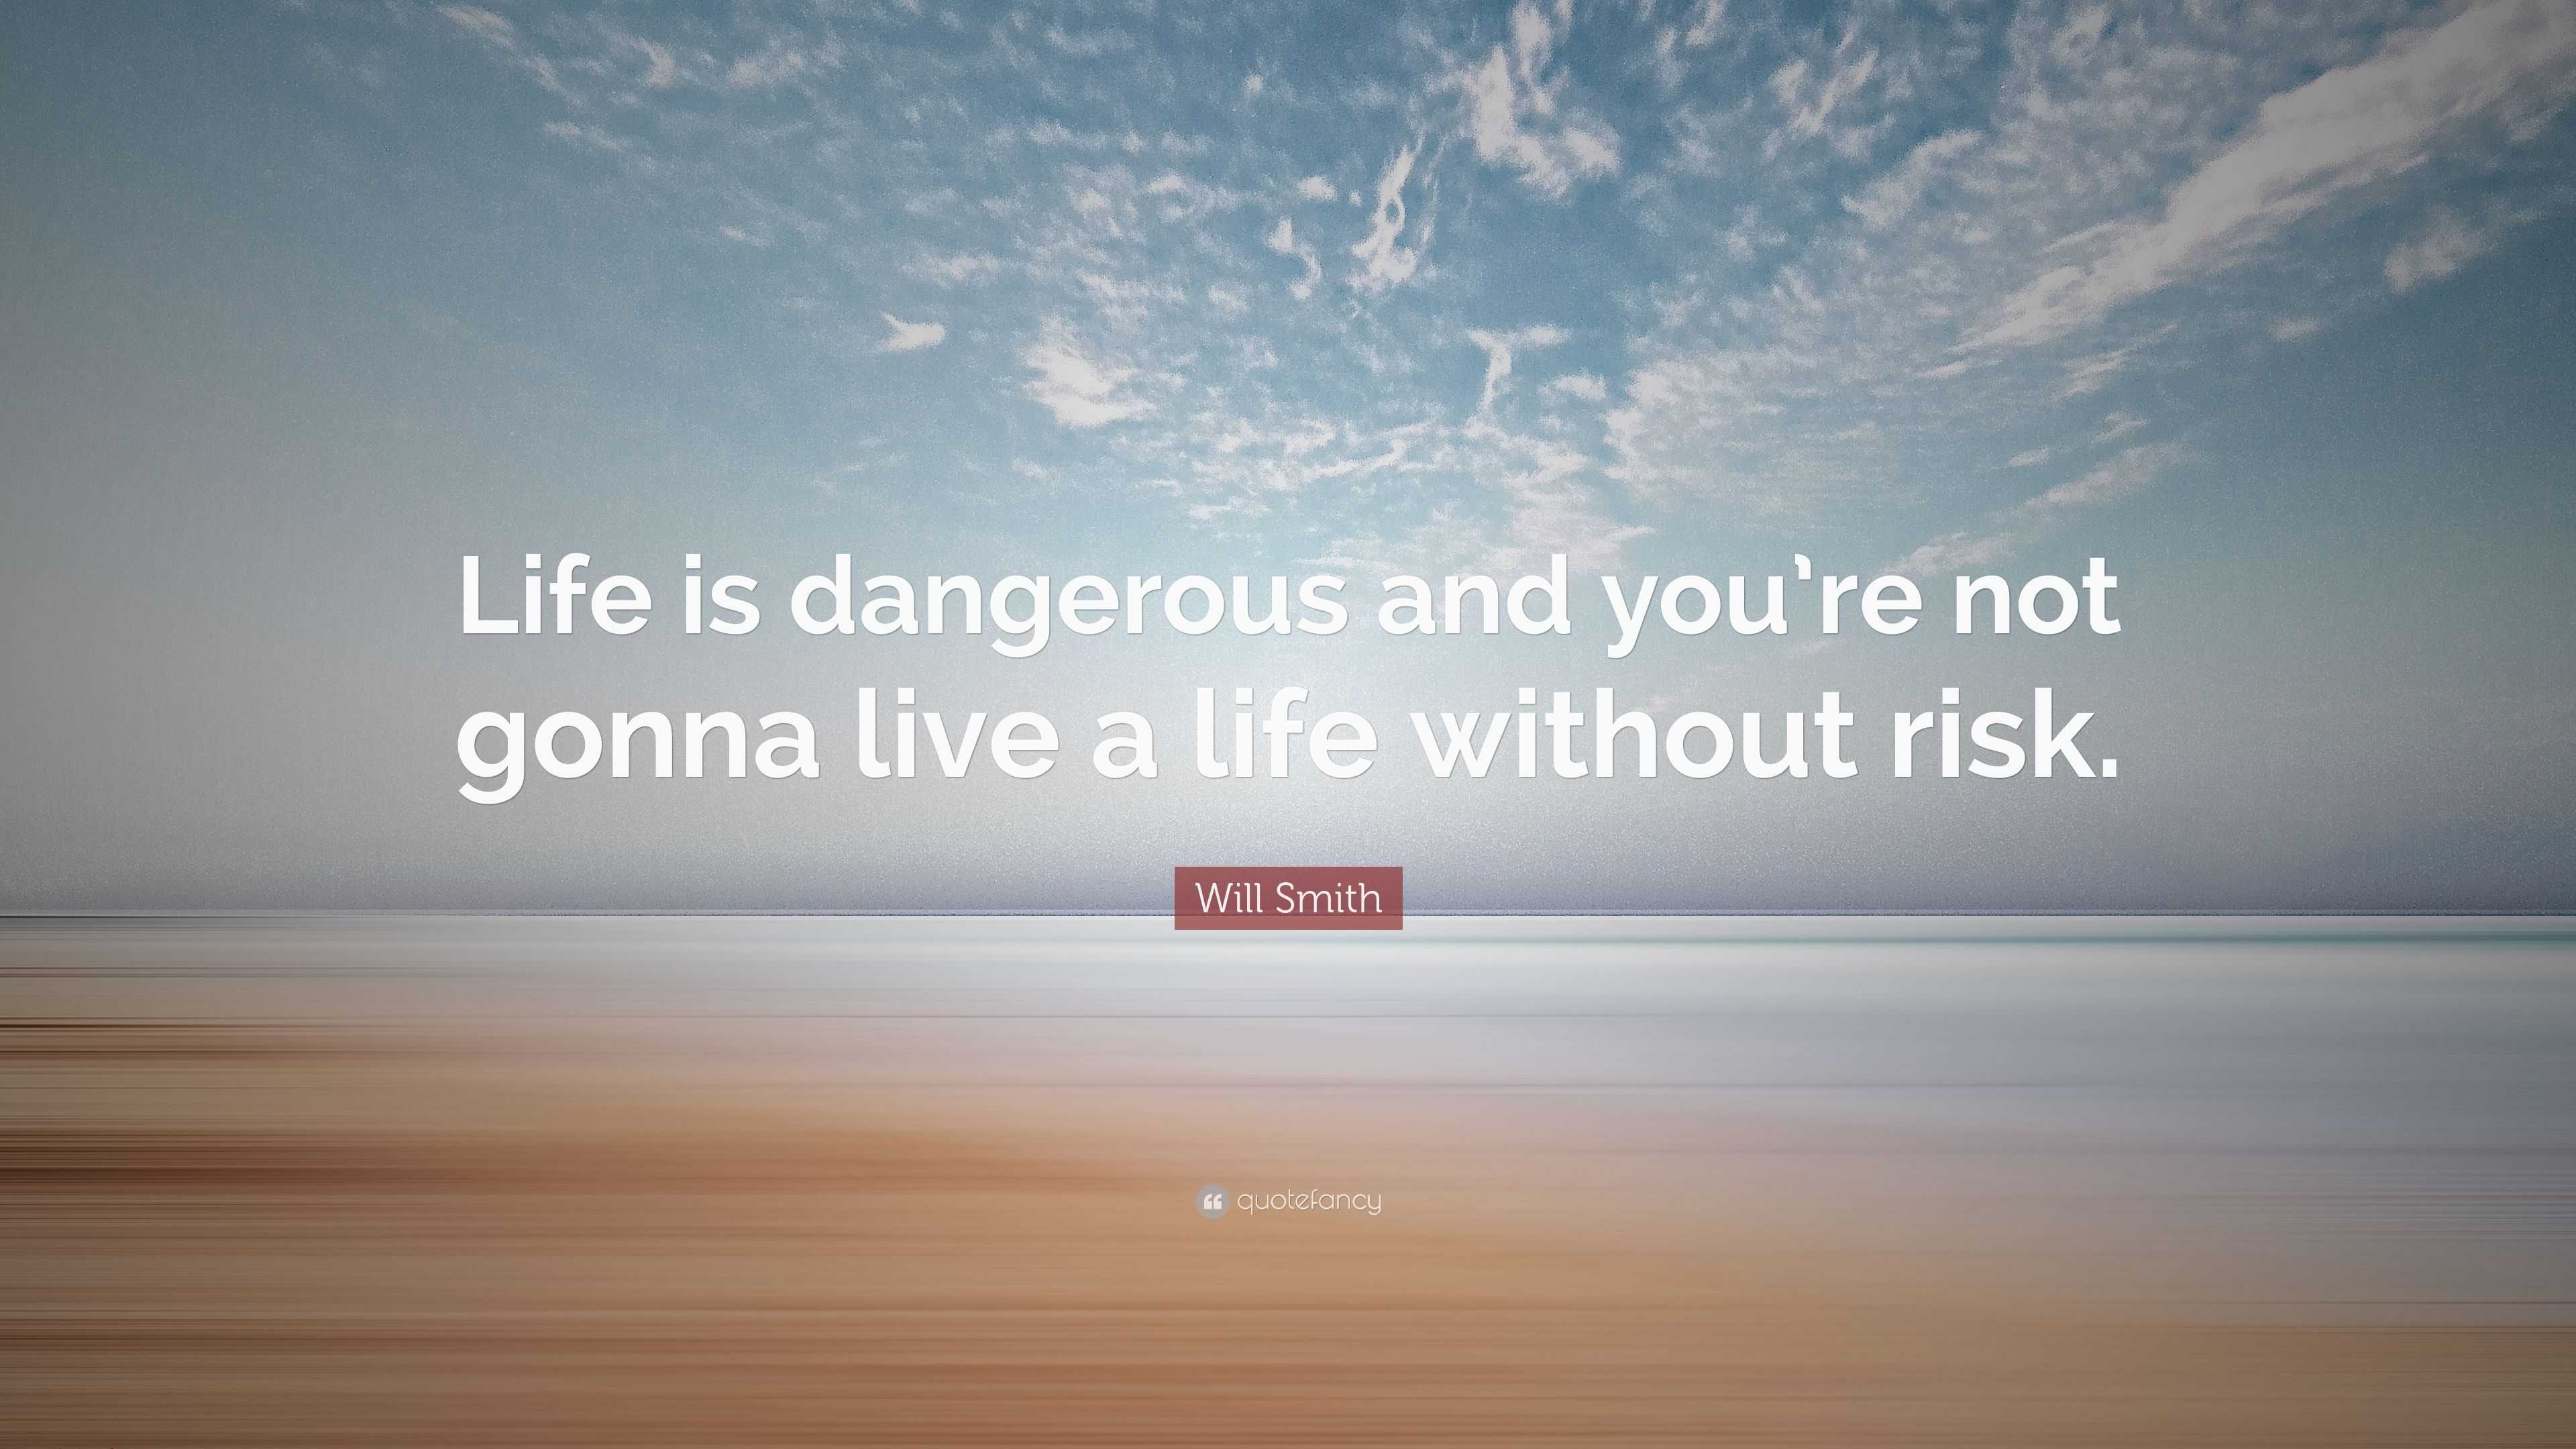 Will Smith Quote “Life is dangerous and you re not gonna live a